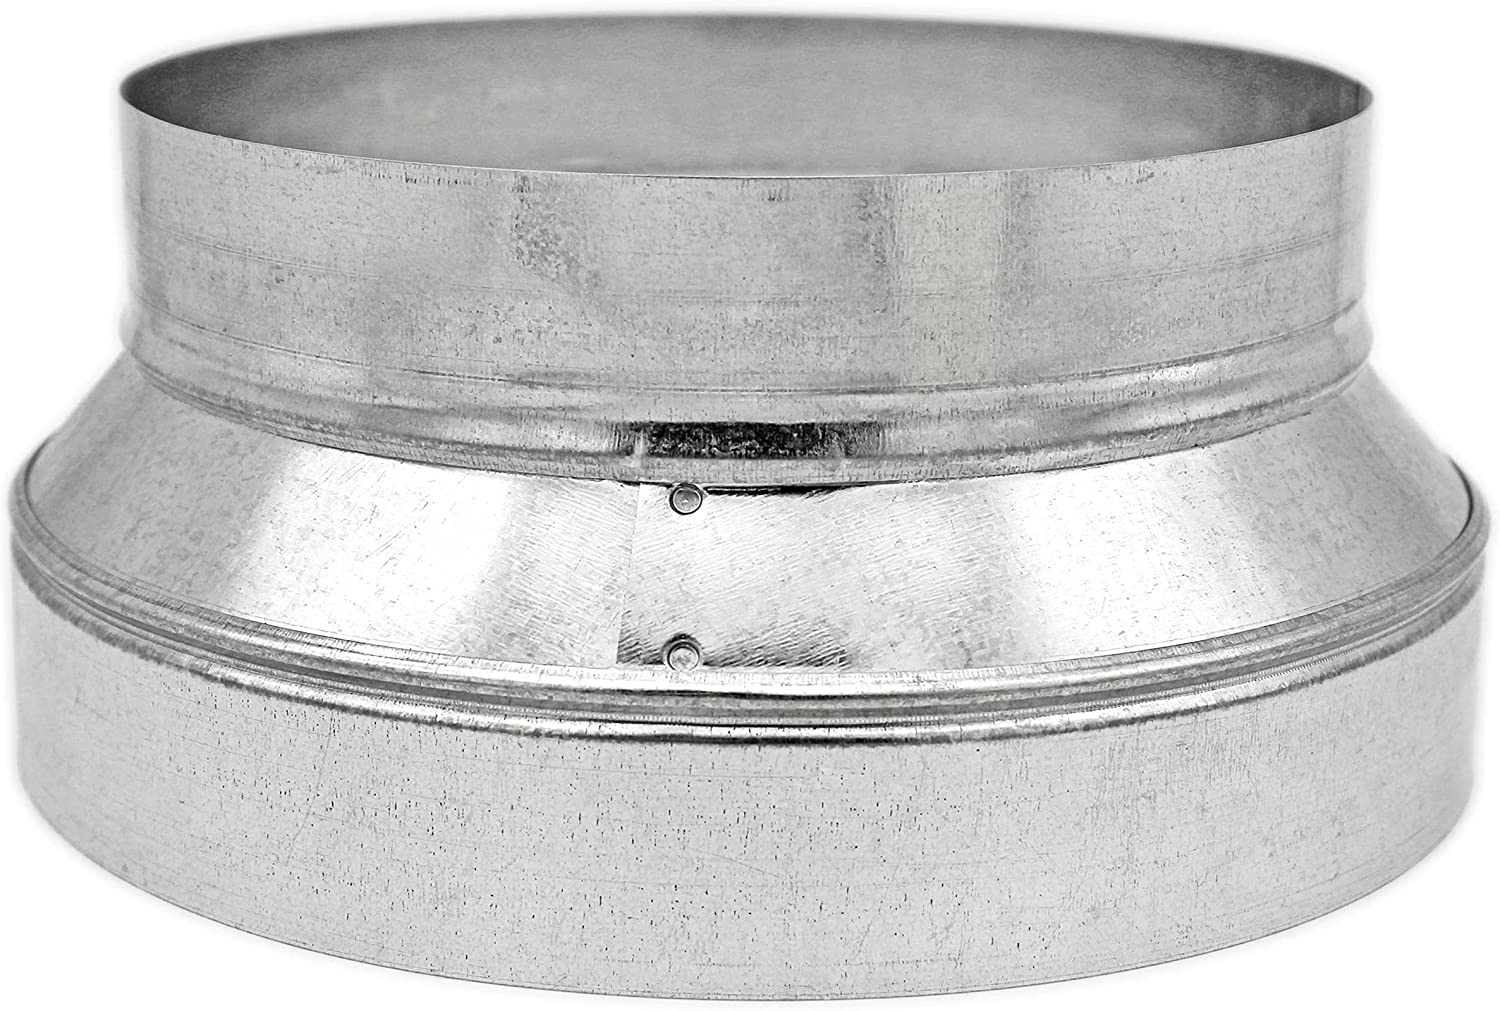 HVAC Premium Round Metal Pipe Reducer & Increaser | 8" to 4" HVAC Duct Reducer or Increaser 30g Gauge | Galvanized Sheet Metal Ducting Connector is Compatible with Duct 4"